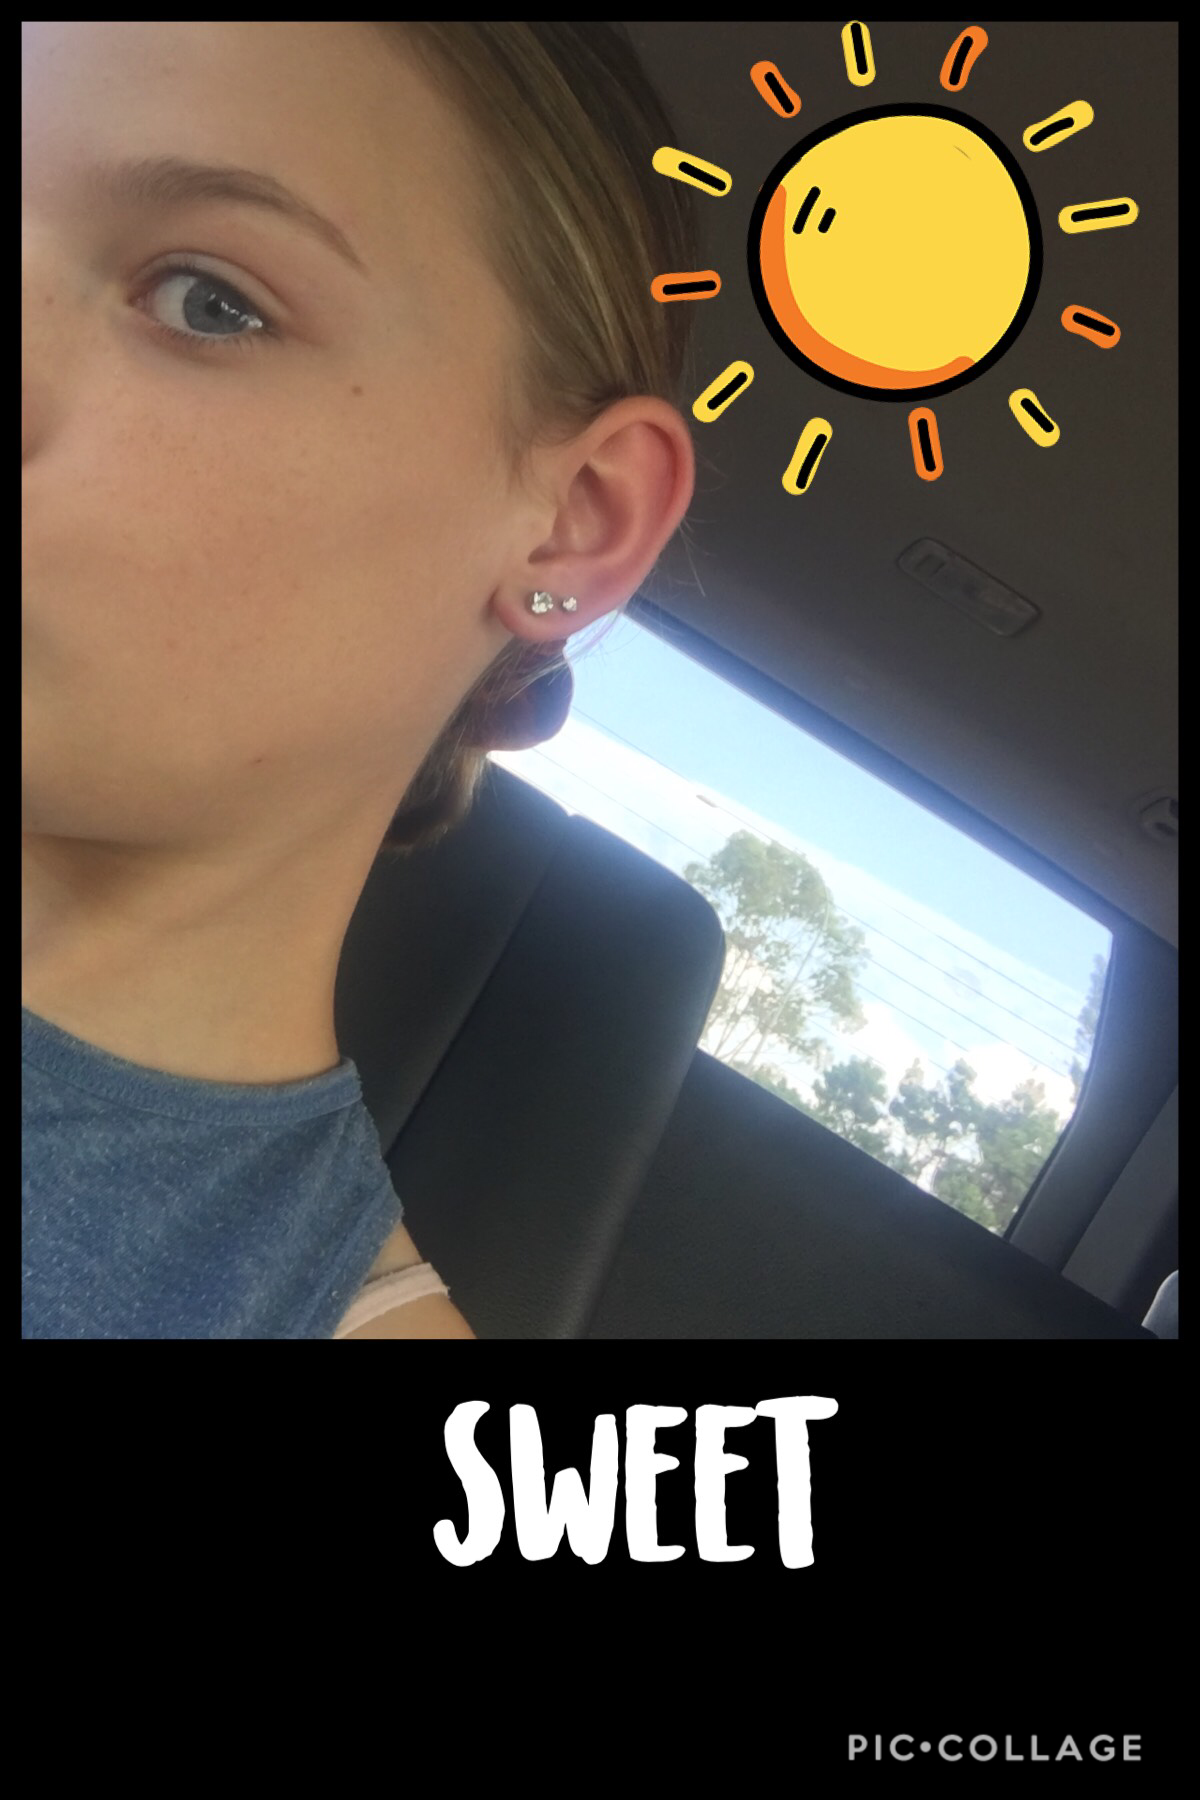 I just got back from barber town and I got ear piercing wow 😲 